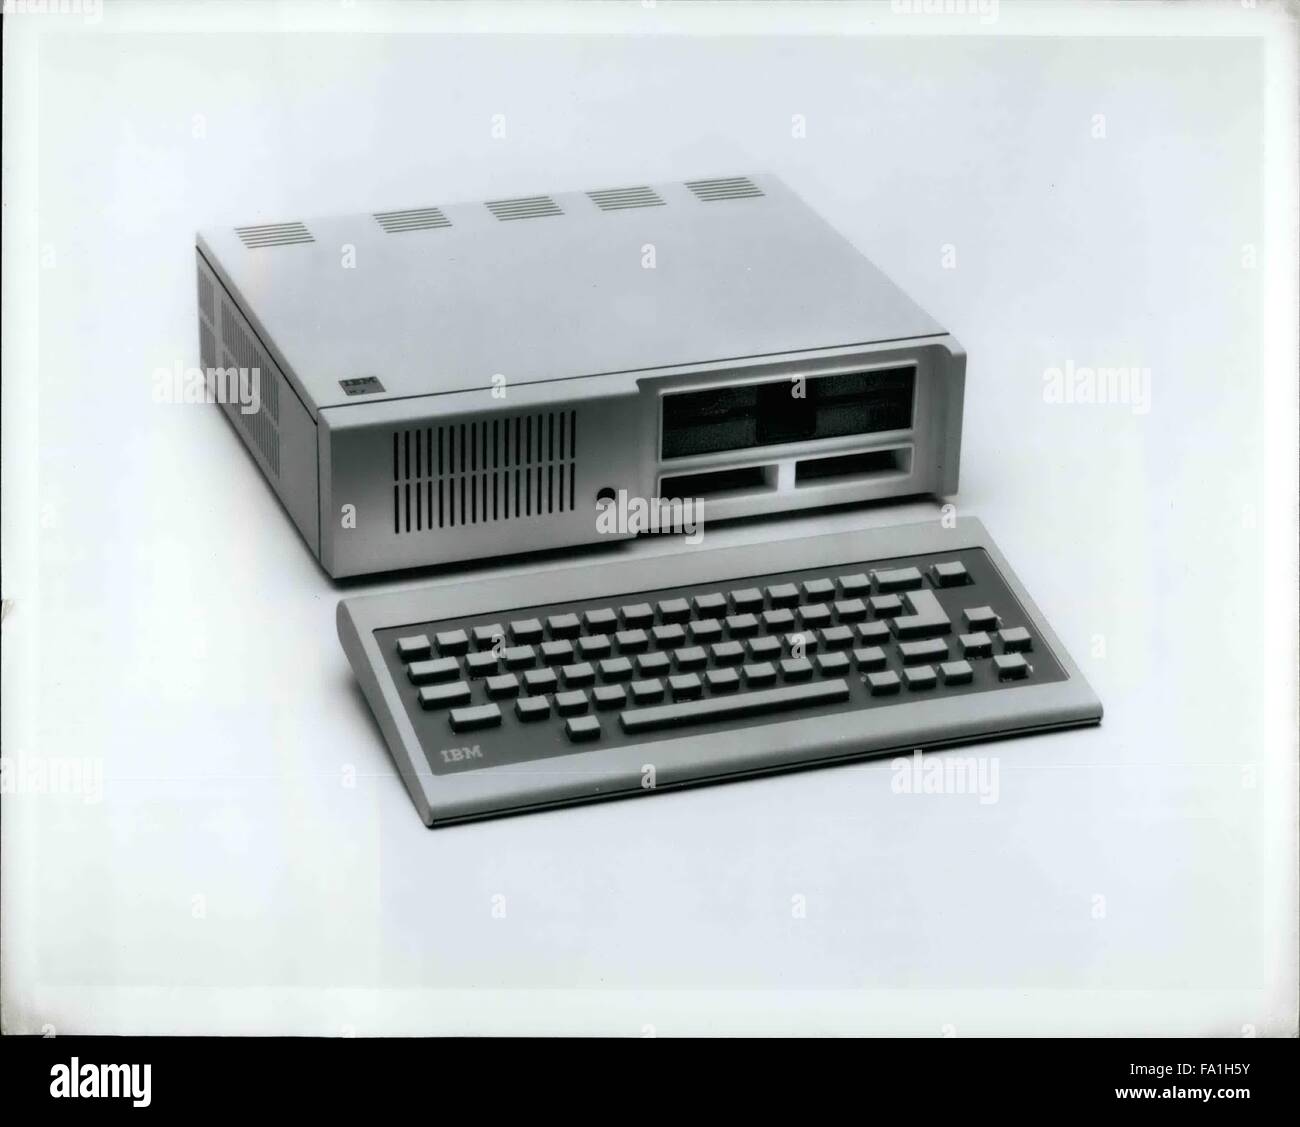 1972 - The IBM PCjr is the company's newest and most affordable computer. The version shown above features 131,072 characters of user memory, a 368, 640-character diskette drive, two program cartridge slots, and a cordless, infrared keyboard. It can be connected to a television or color monitor. When used with IBM's new Disk Operating System 2.1, this model is compatible with many diskette programs available for IBM Personal Computers. It is priced at ,269 at IBM Product Centers. The entry model, with 65,536 characters of user memory and without the diskette drive, is Priced at 69. (Credit Ima Stock Photo